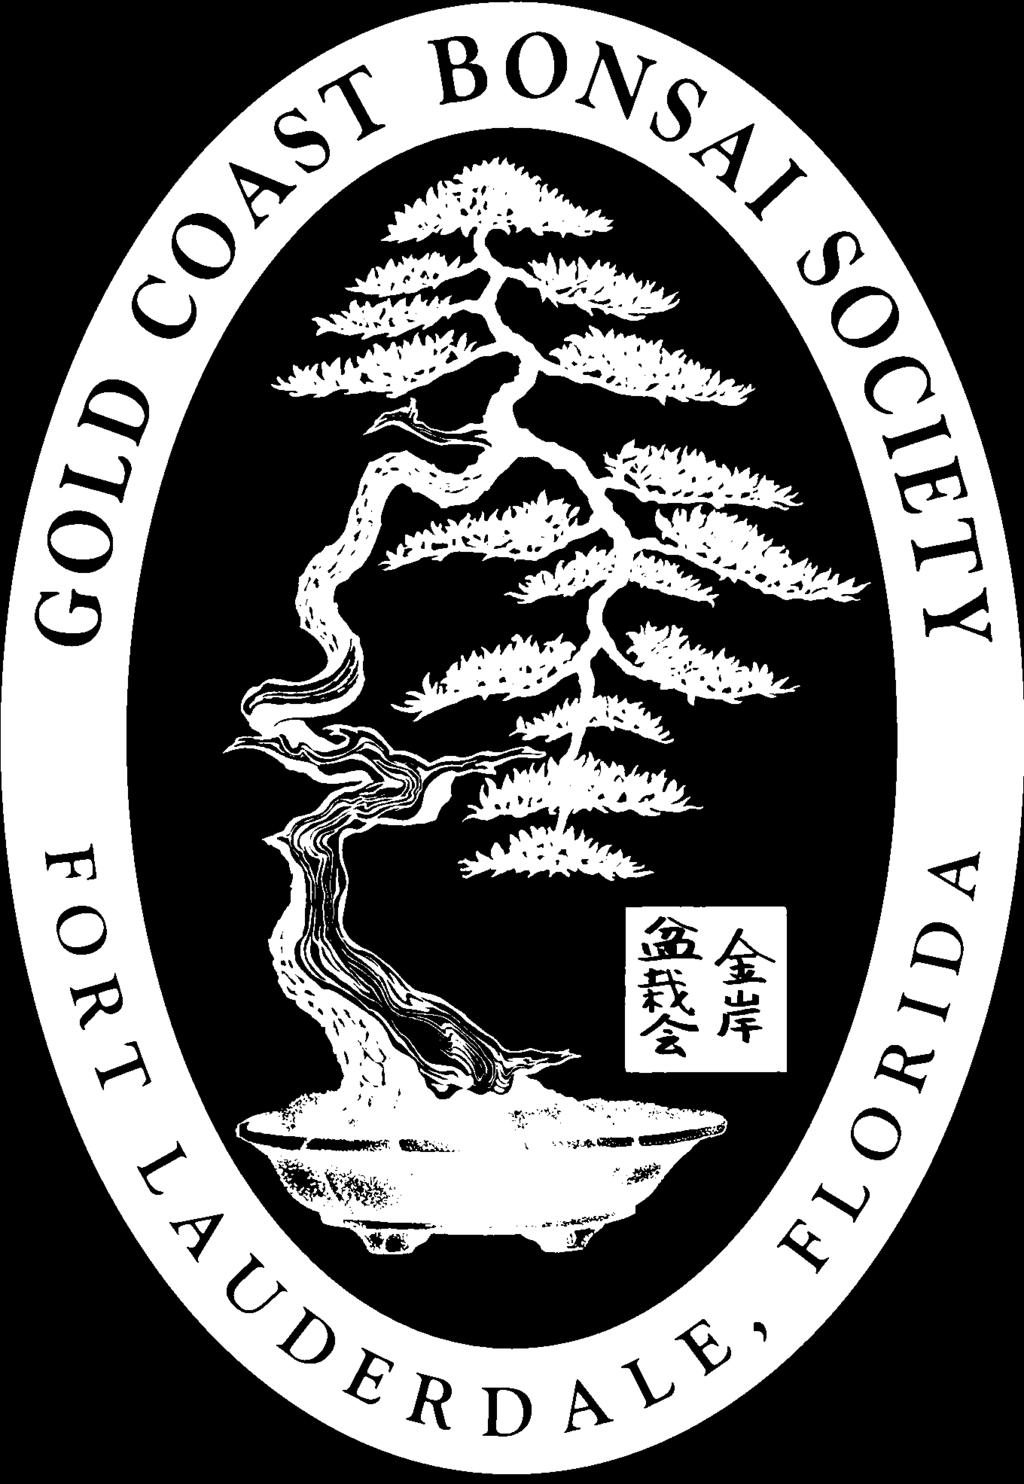 OCTOBER NEWSLETTER Volume #11 Issue # 10 SCHEDULED MEETING WILL BE 9:00 A.M. Oct. 08, 2011 www.goldcoastbonsai.